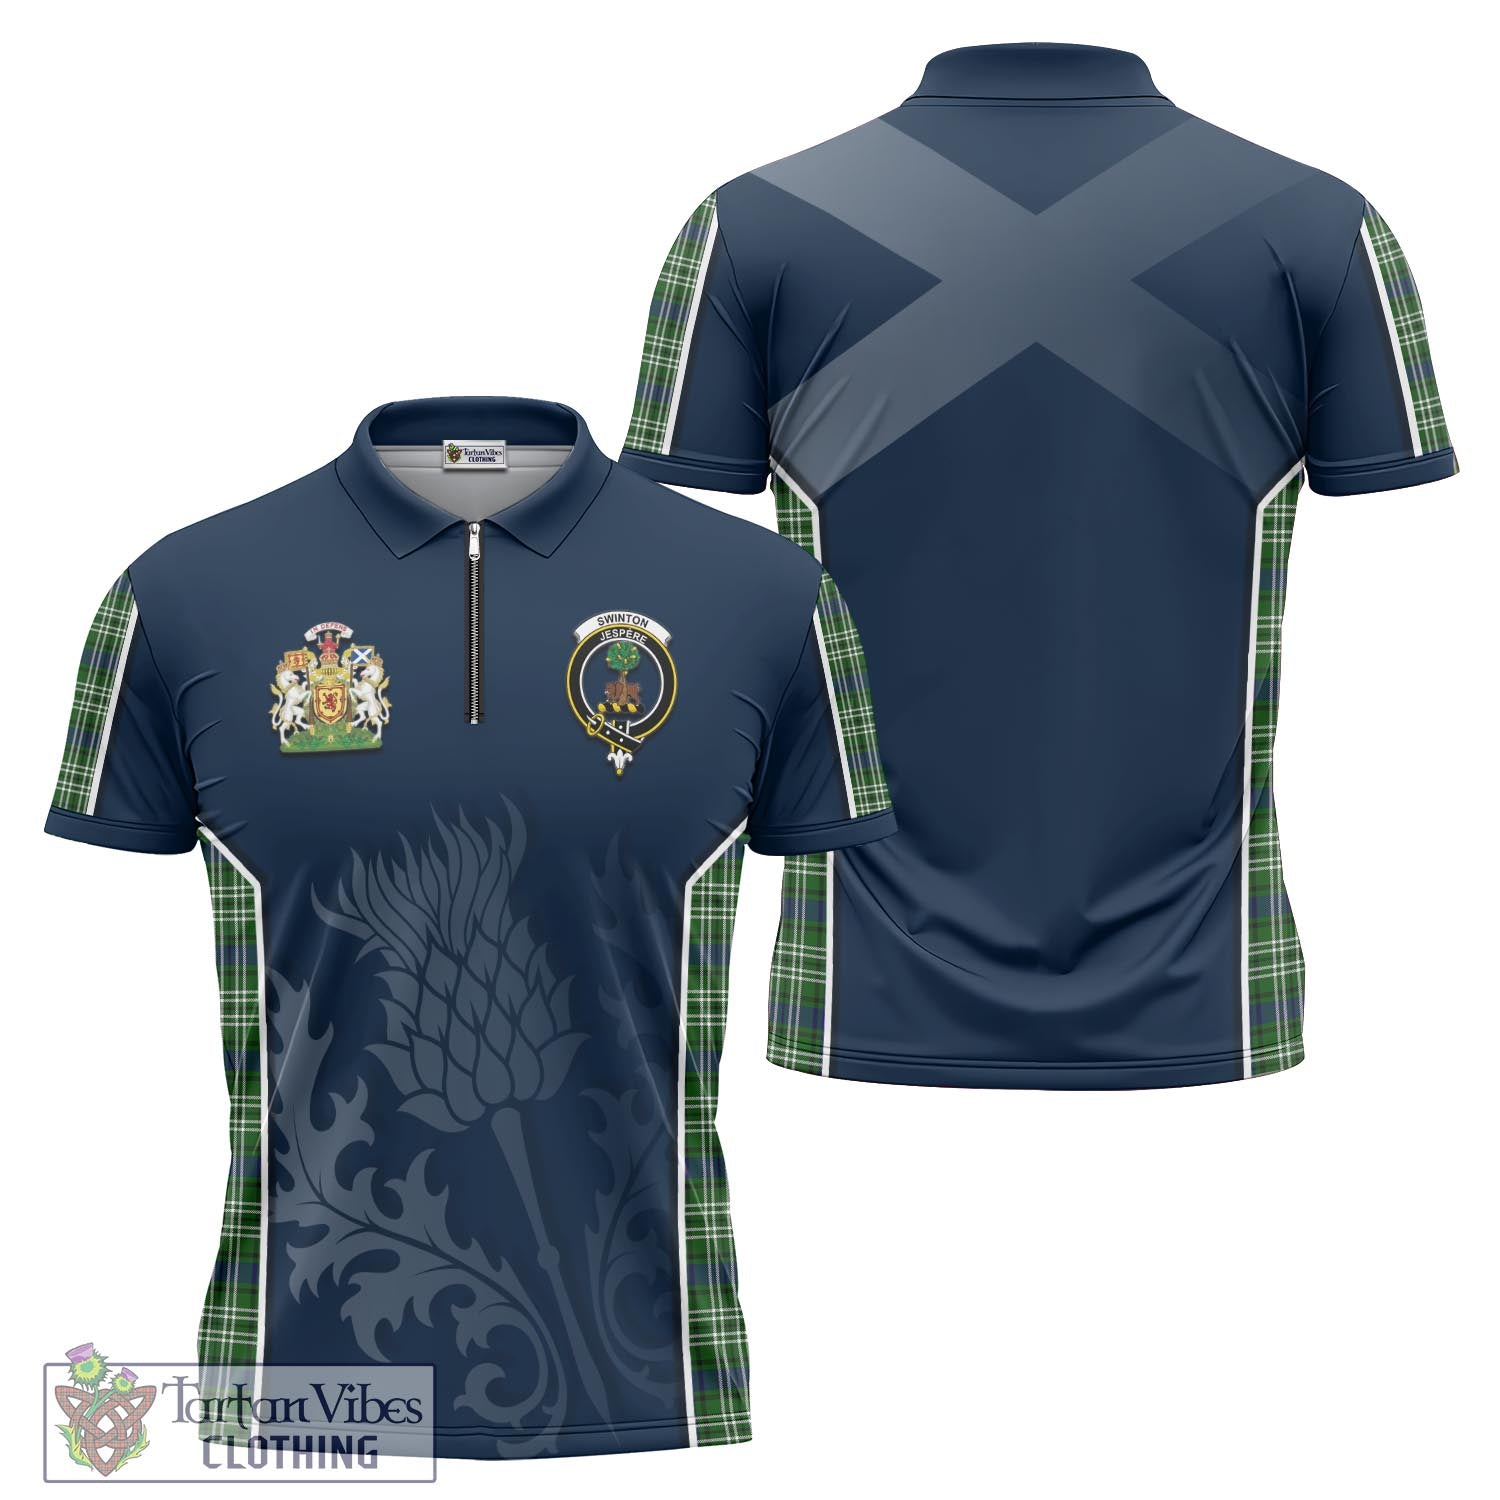 Tartan Vibes Clothing Swinton Tartan Zipper Polo Shirt with Family Crest and Scottish Thistle Vibes Sport Style